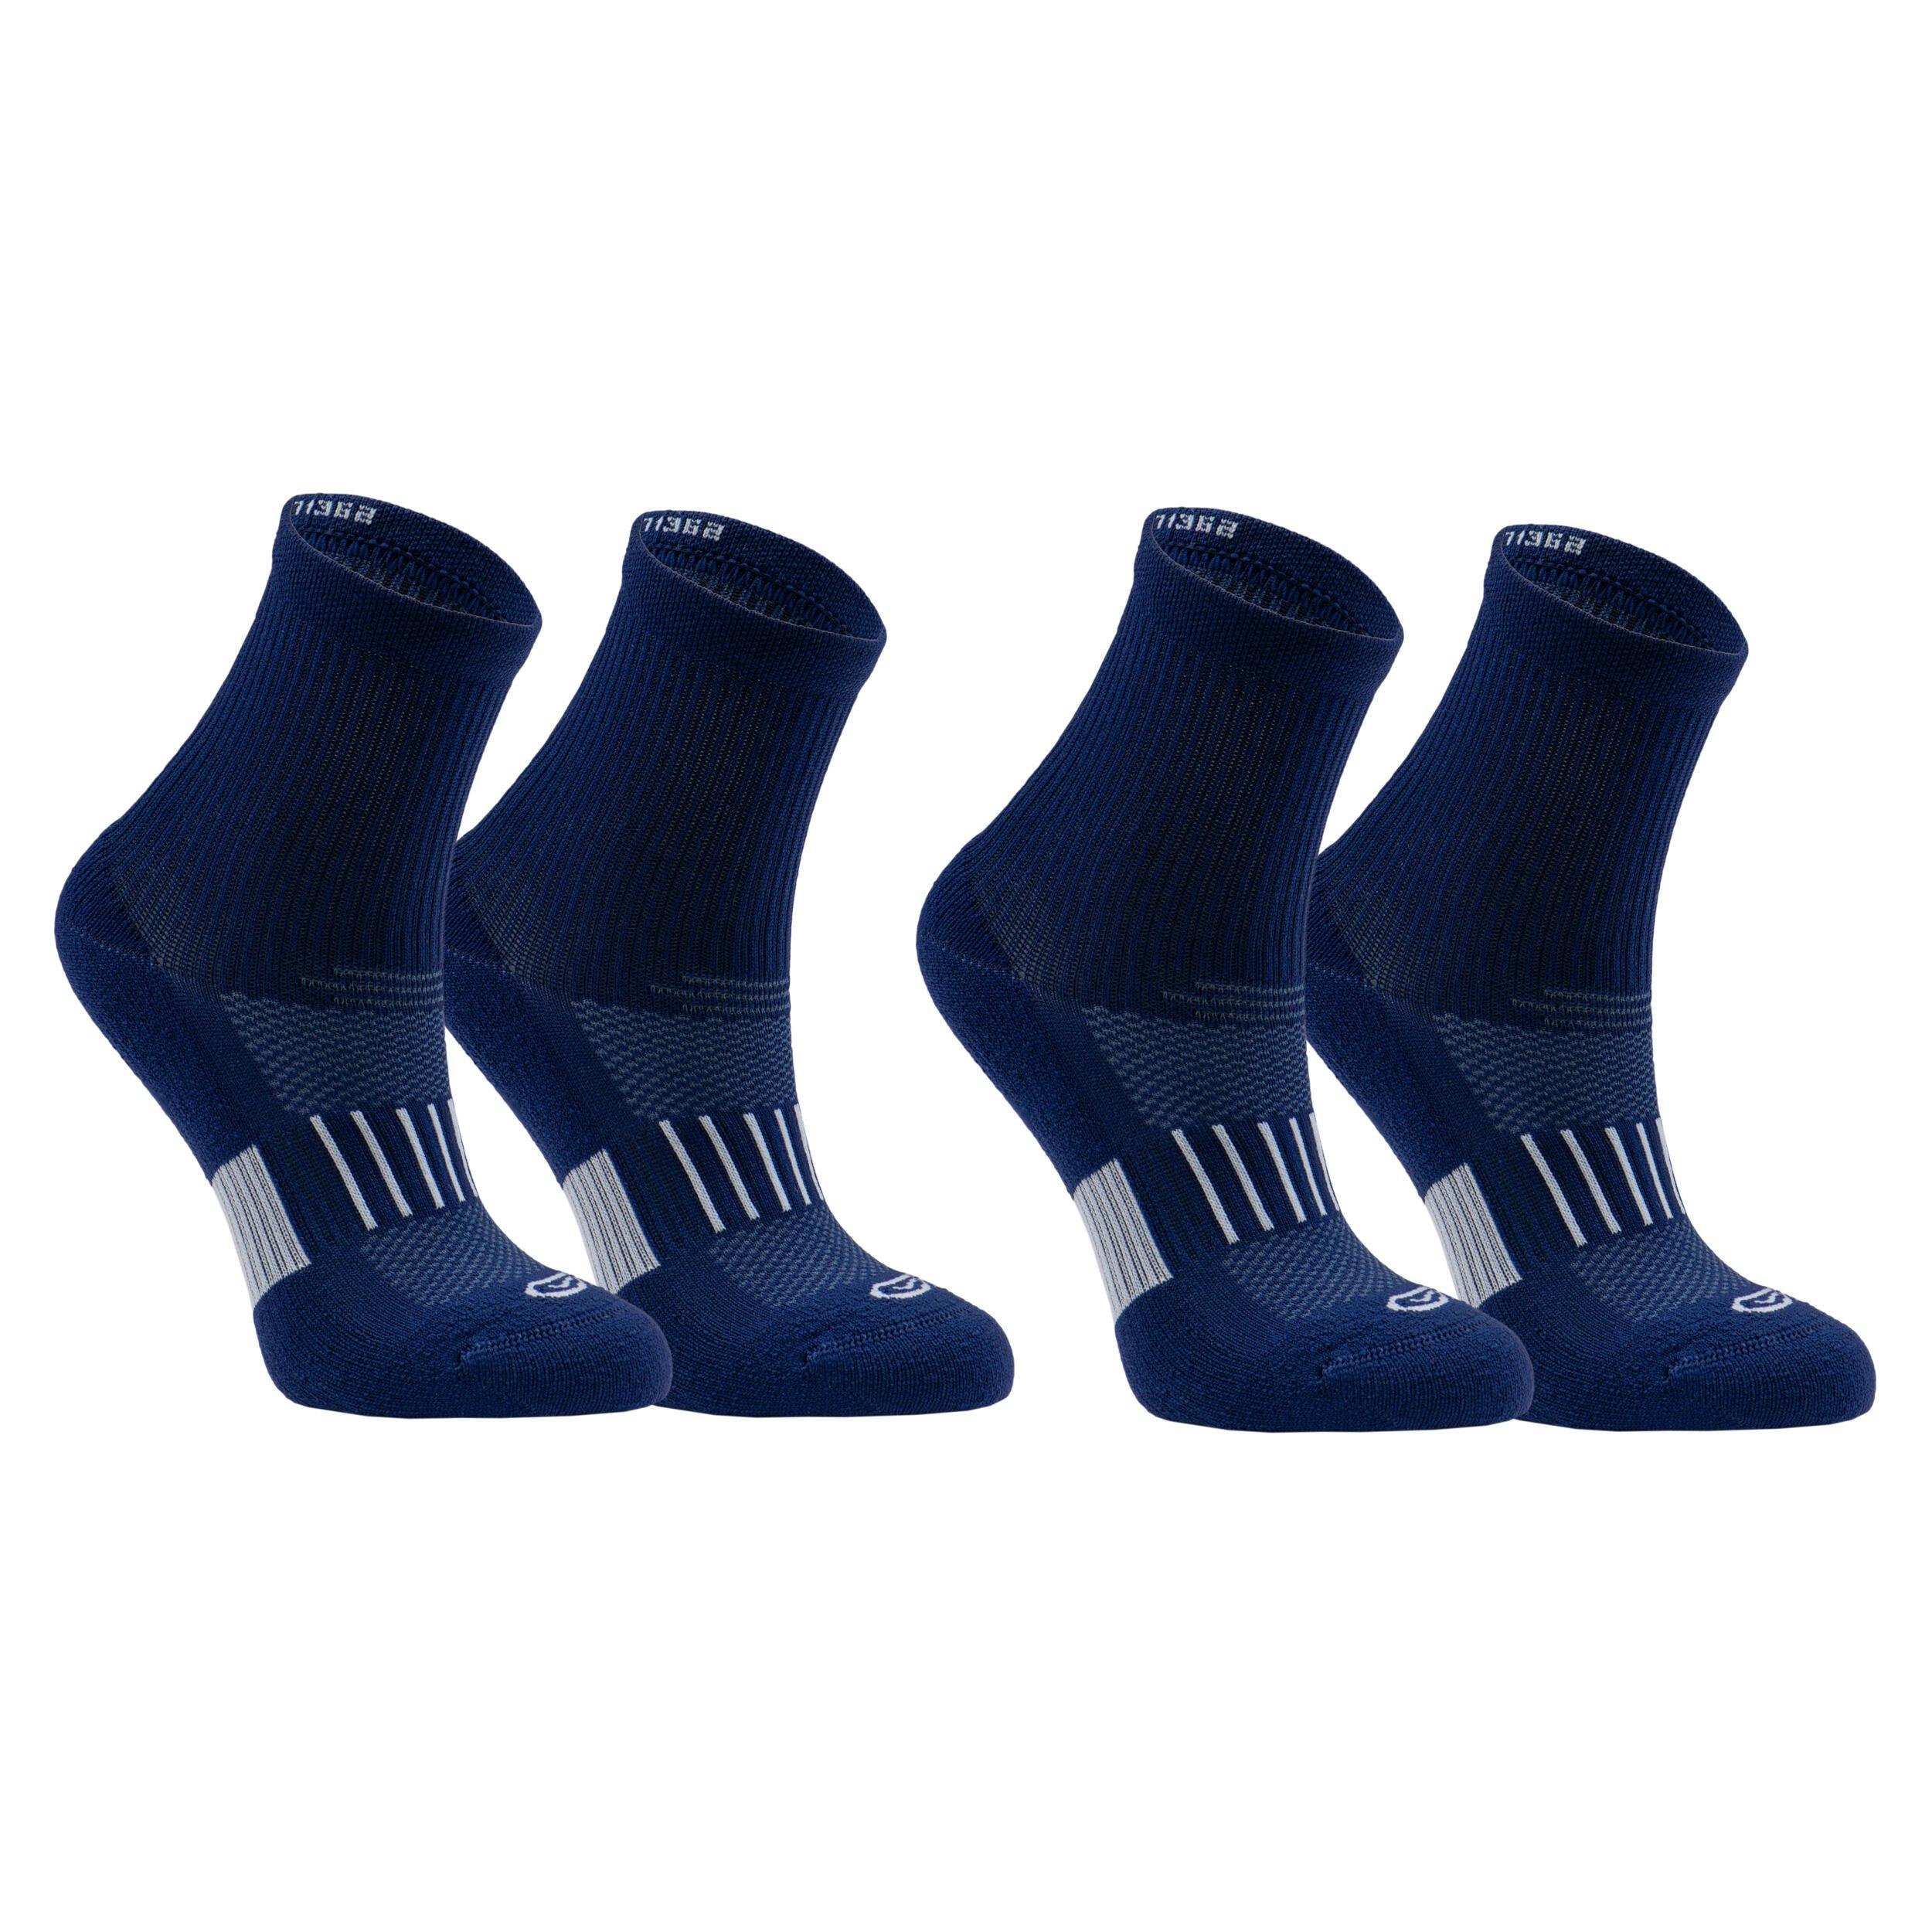 Decathlon Socks At 500 Mid 2-Pack -And Stripes